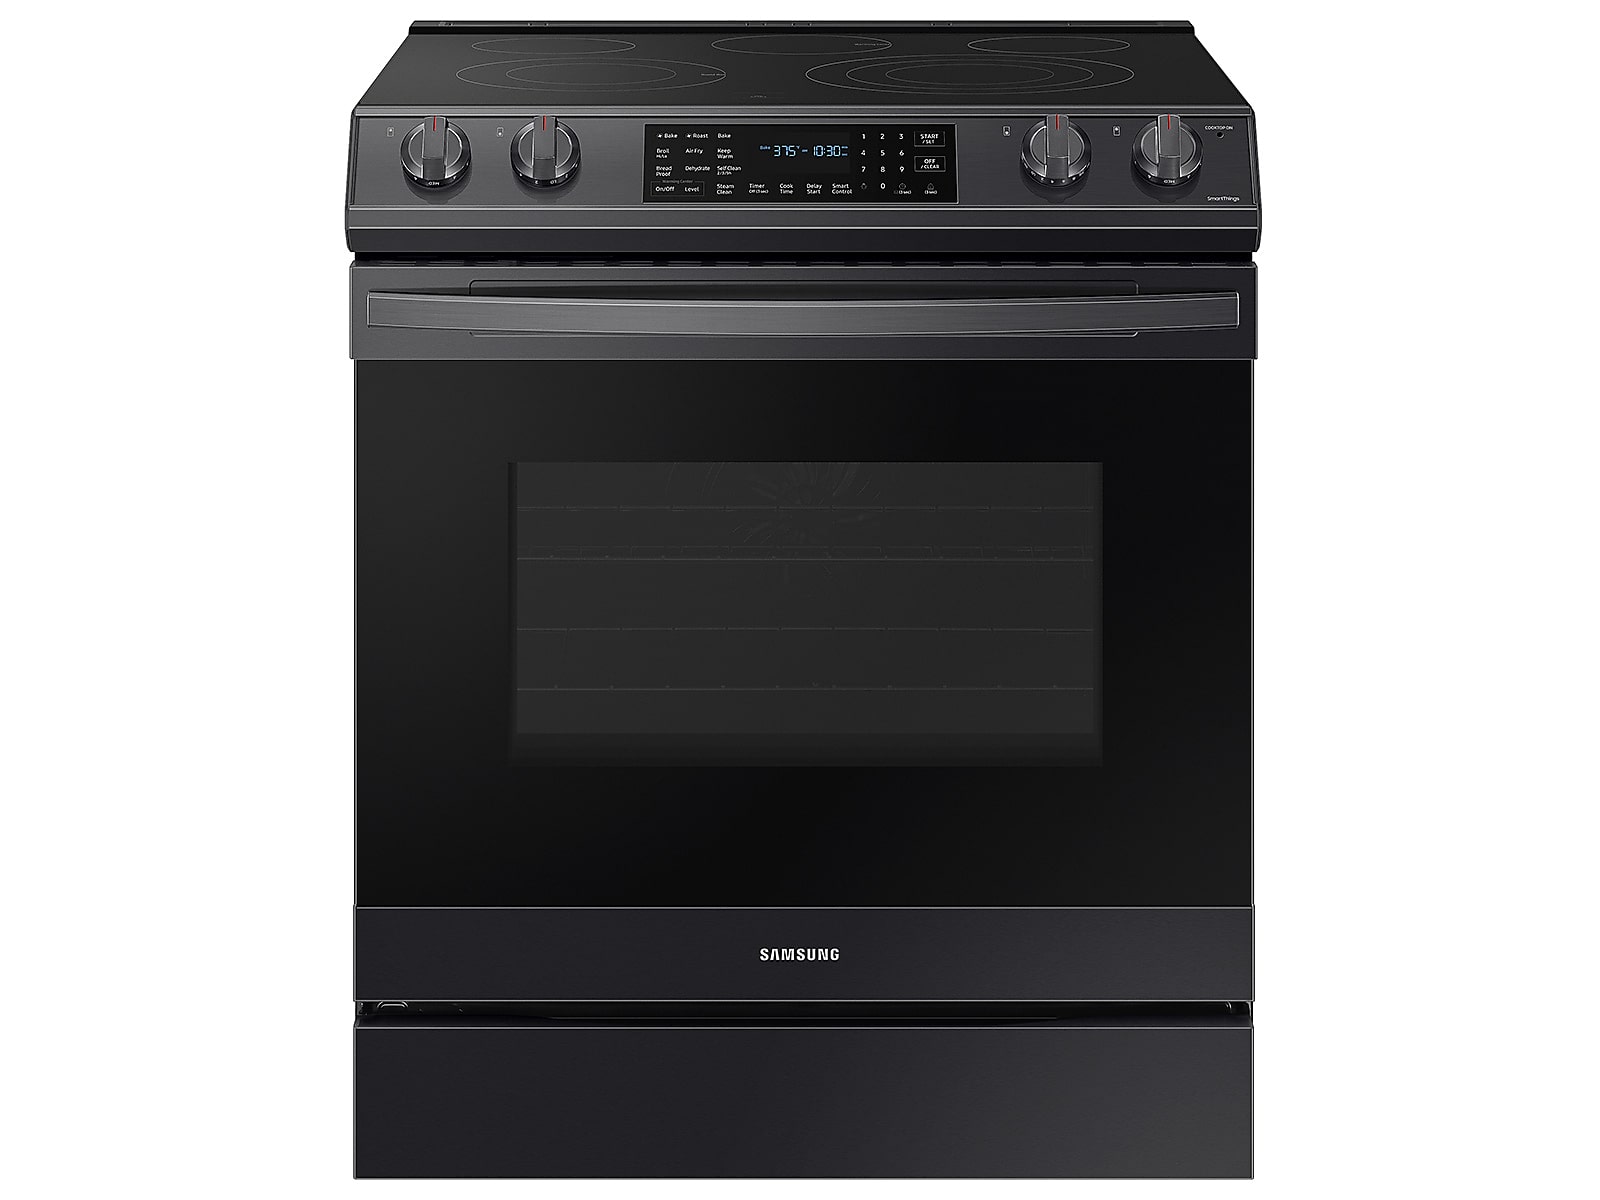 Samsung 6.3 cu. ft. Smart Slide-in Electric Range with Air Fry in Black Stainless Steel(NE63T8511SG/AA)